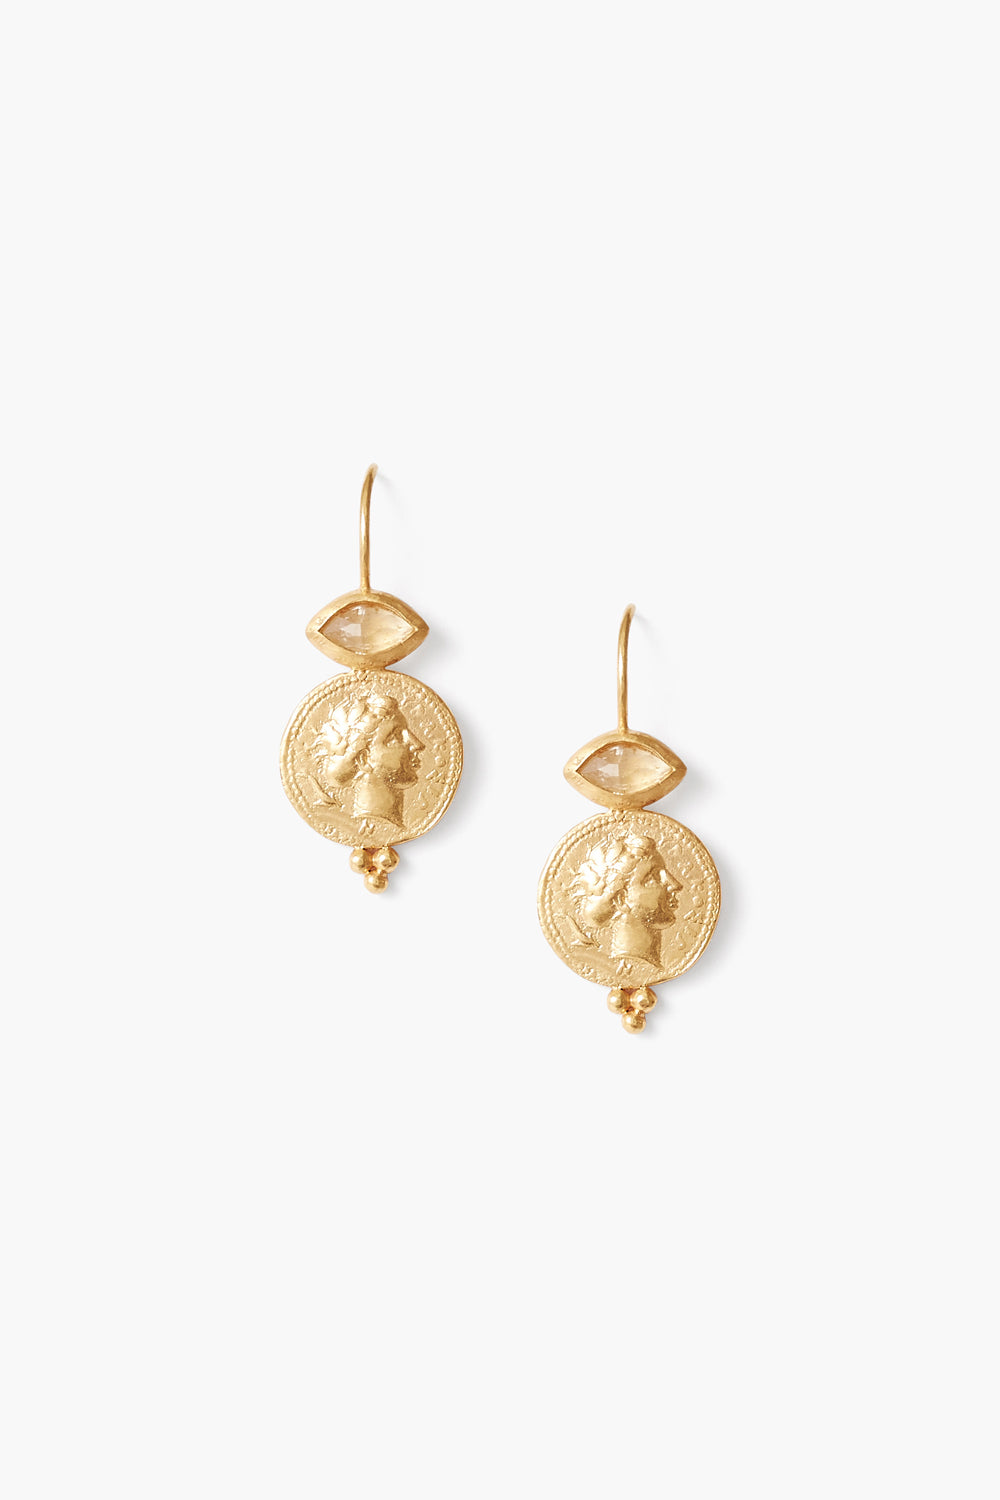 CITRINE BEZEL SET COIN FRENCH HOOK EARRING - Kingfisher Road - Online Boutique